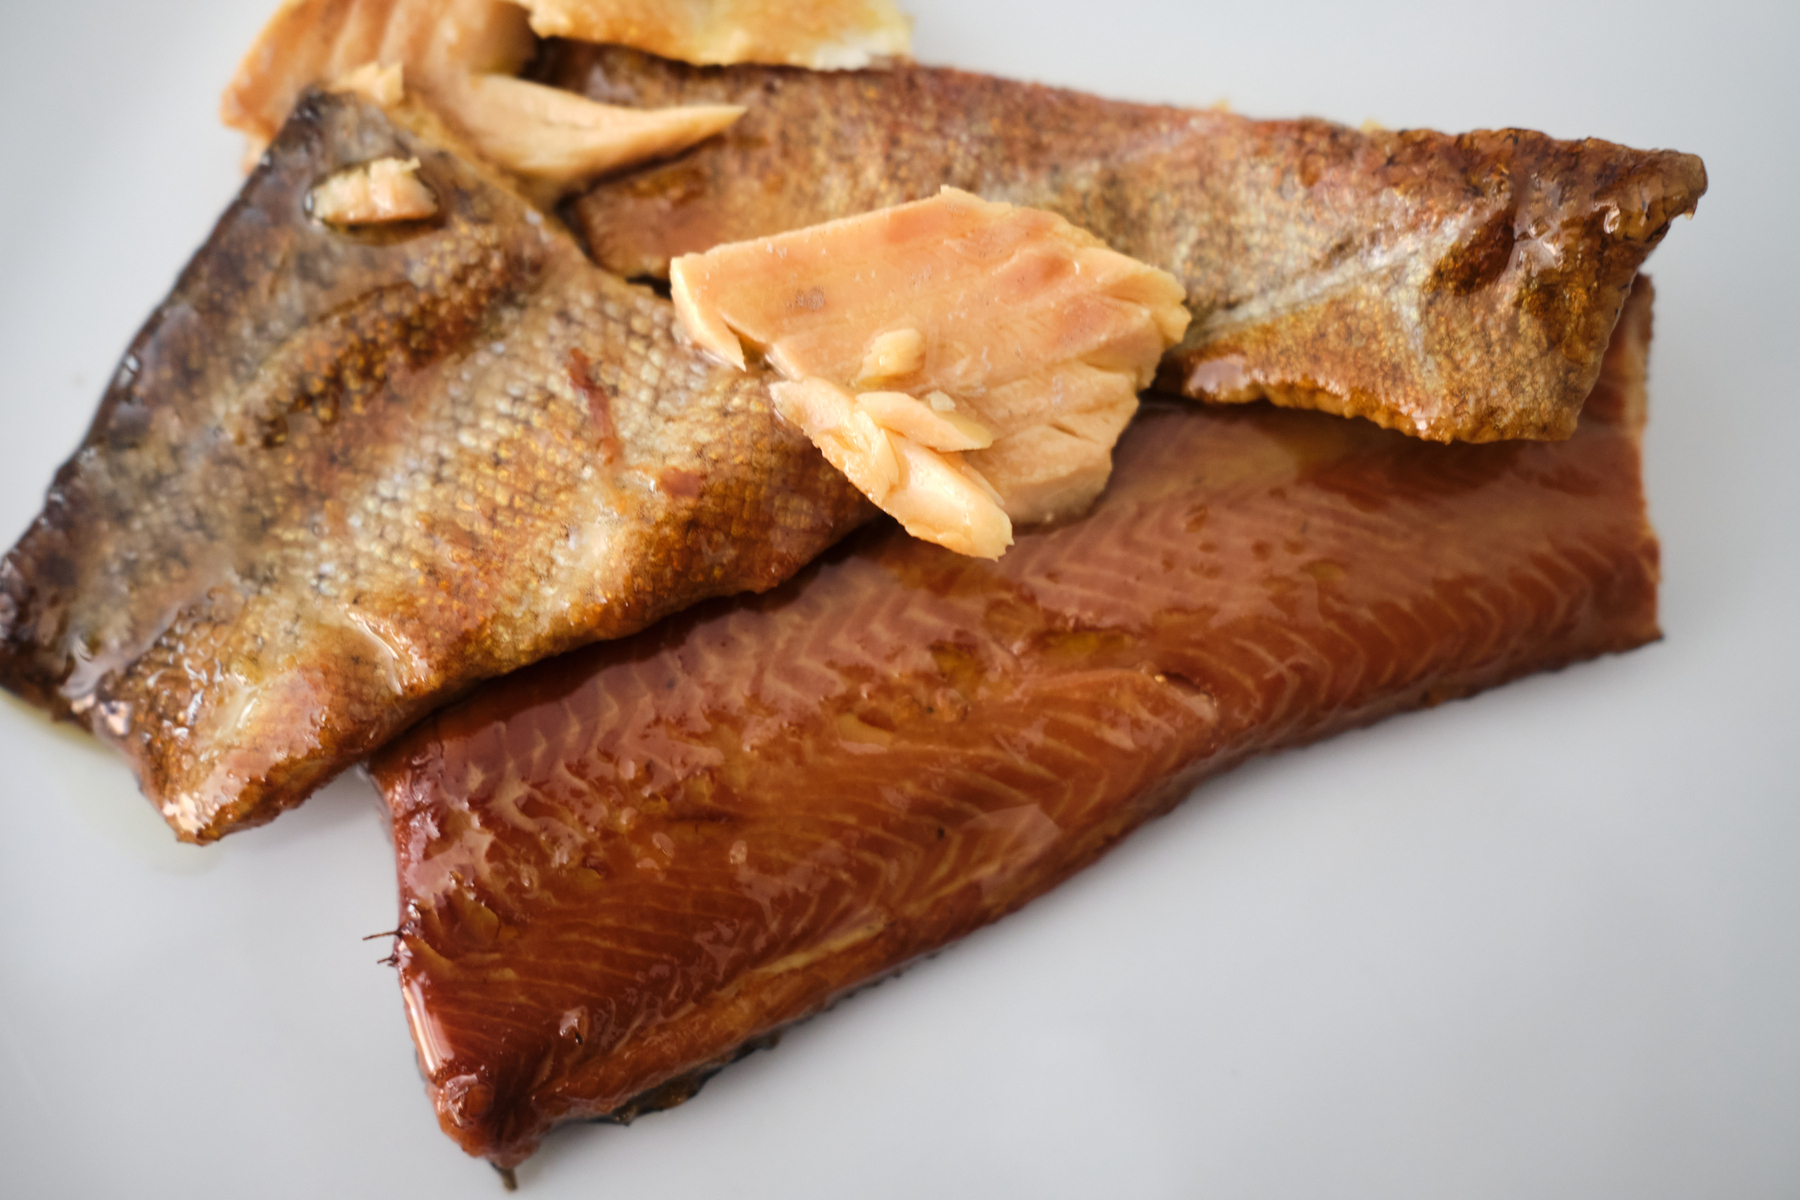 Plated filets of Jose Gourmet smoked trout, showing the flavors and textures up close. 